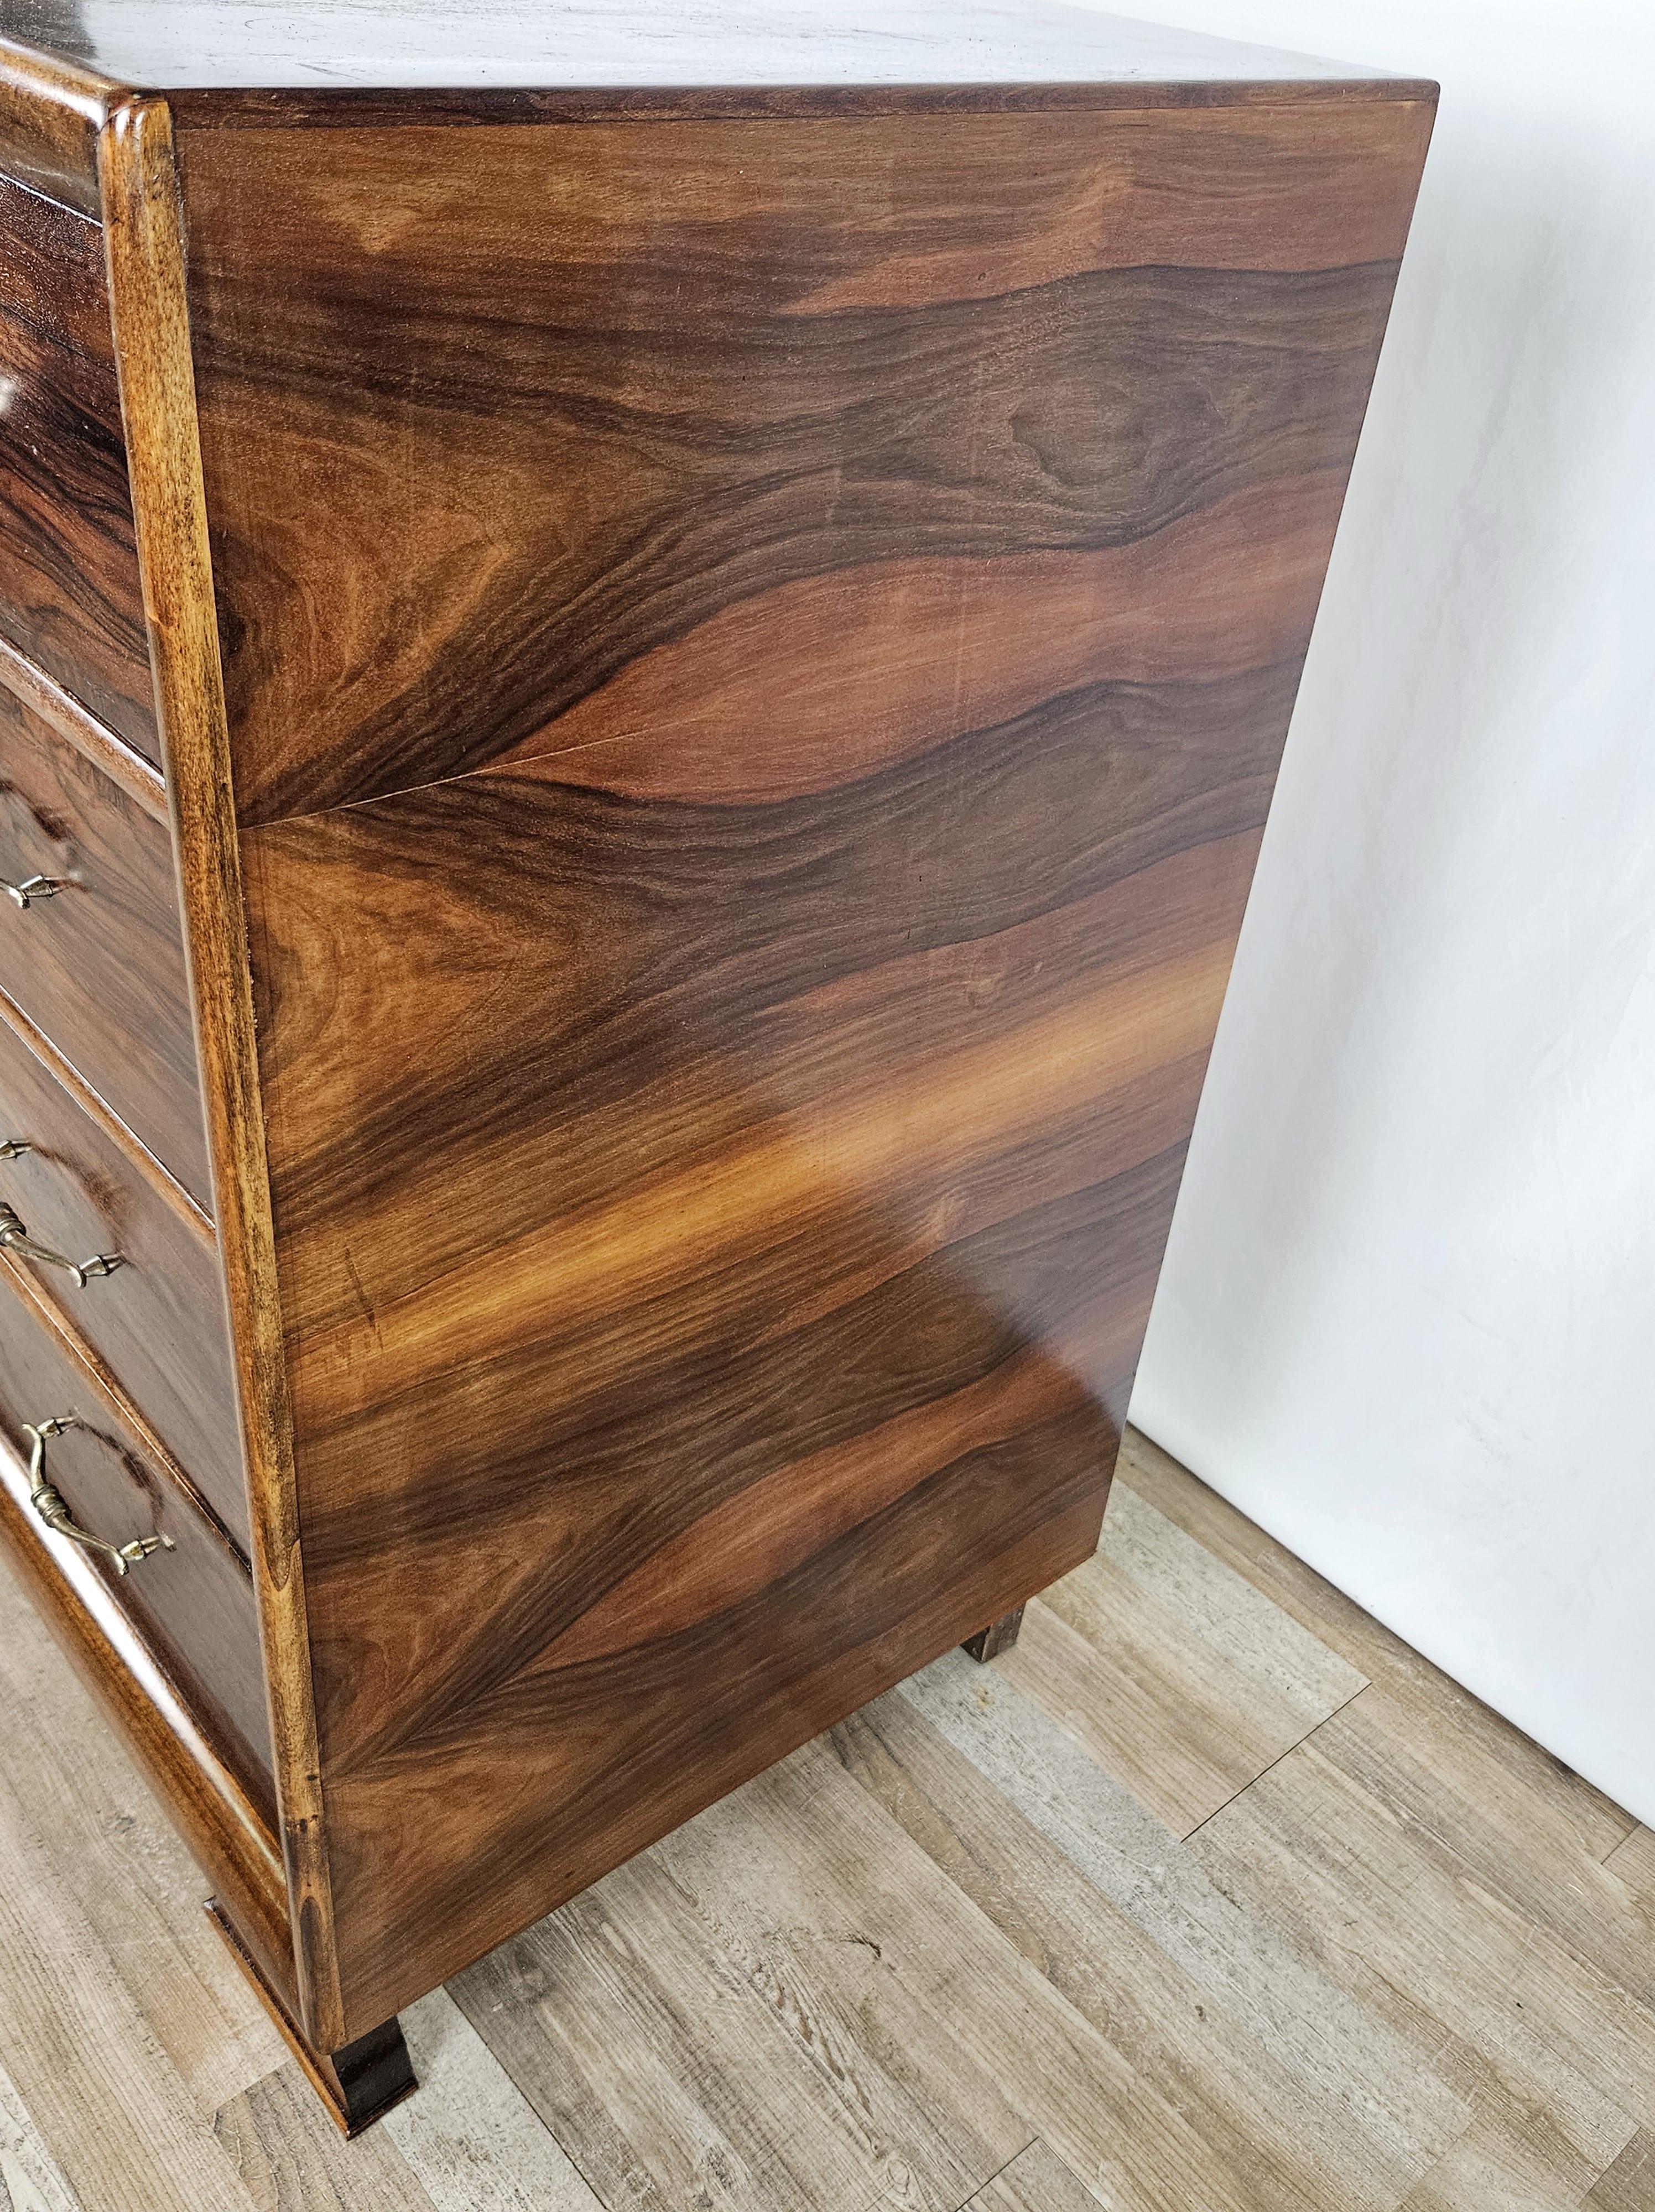 Italian-made chest of drawers from the turn of the 1930s-1940s, a designer piece of furniture covered in walnut burl and decorated with original period brass handles.

The dresser has a soft line that is slightly rounded at the inner edges, note the